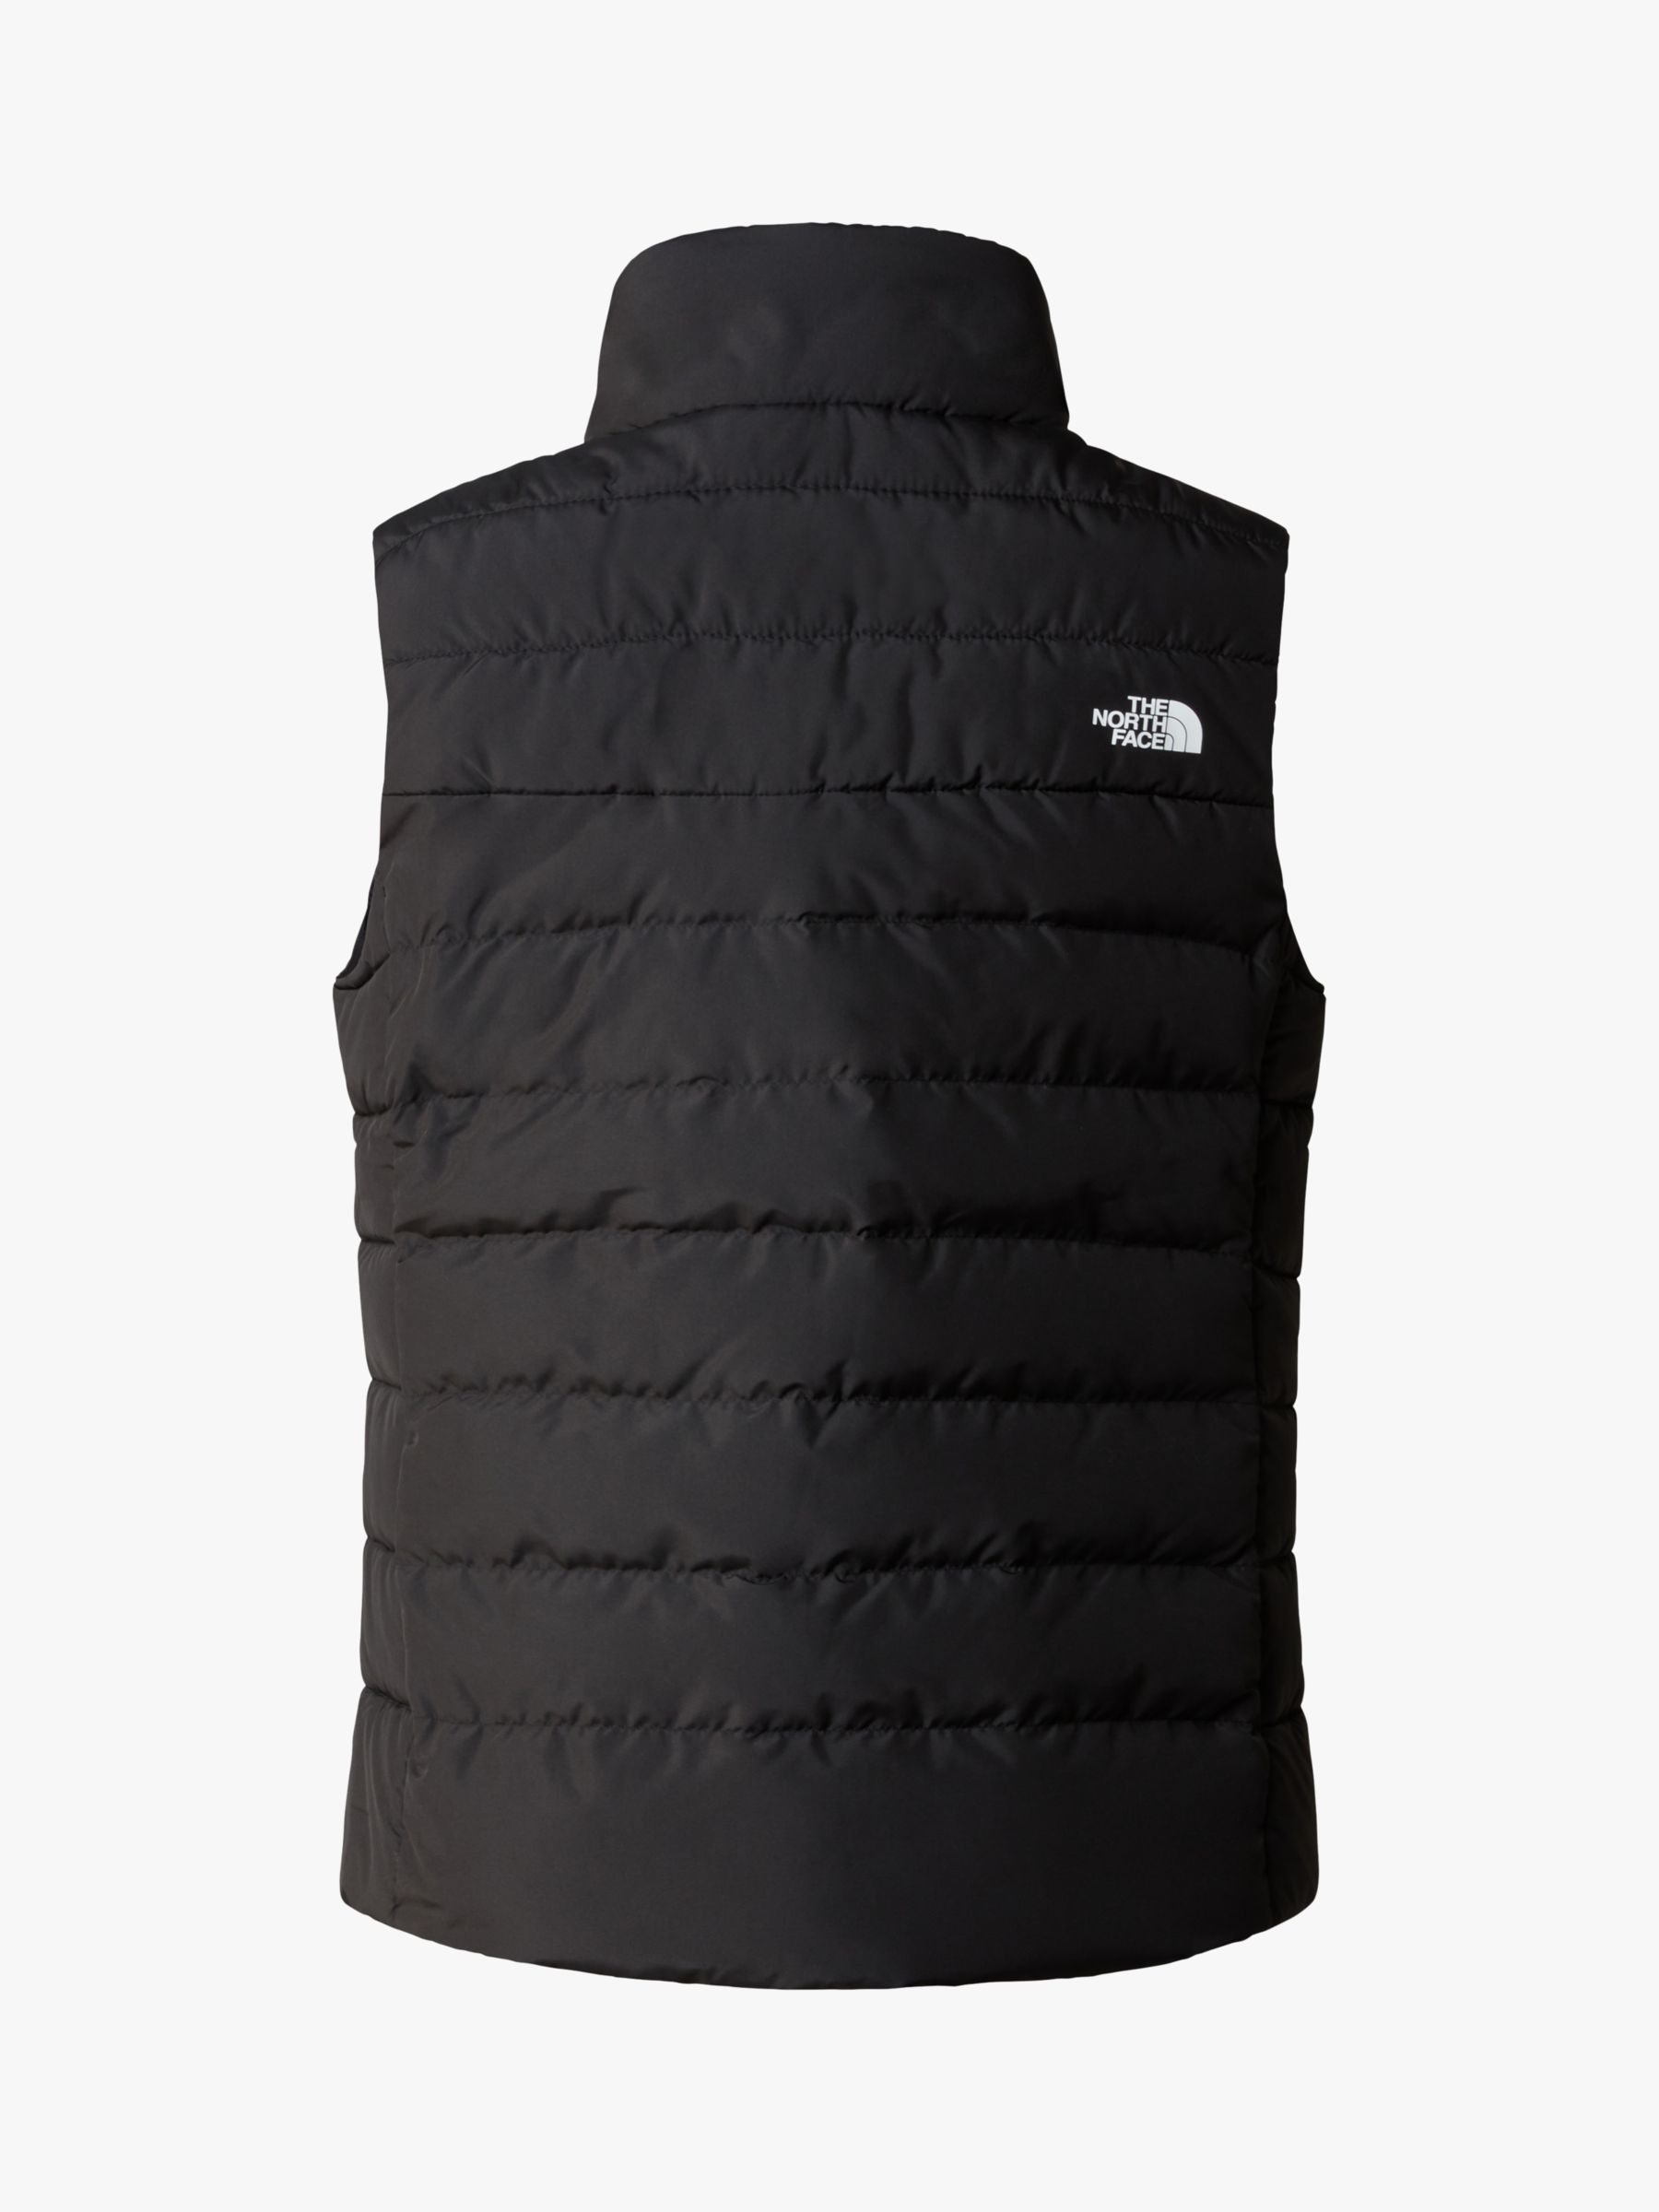 Women's Akoncagua Lightweight Puffer Vest by The North Face